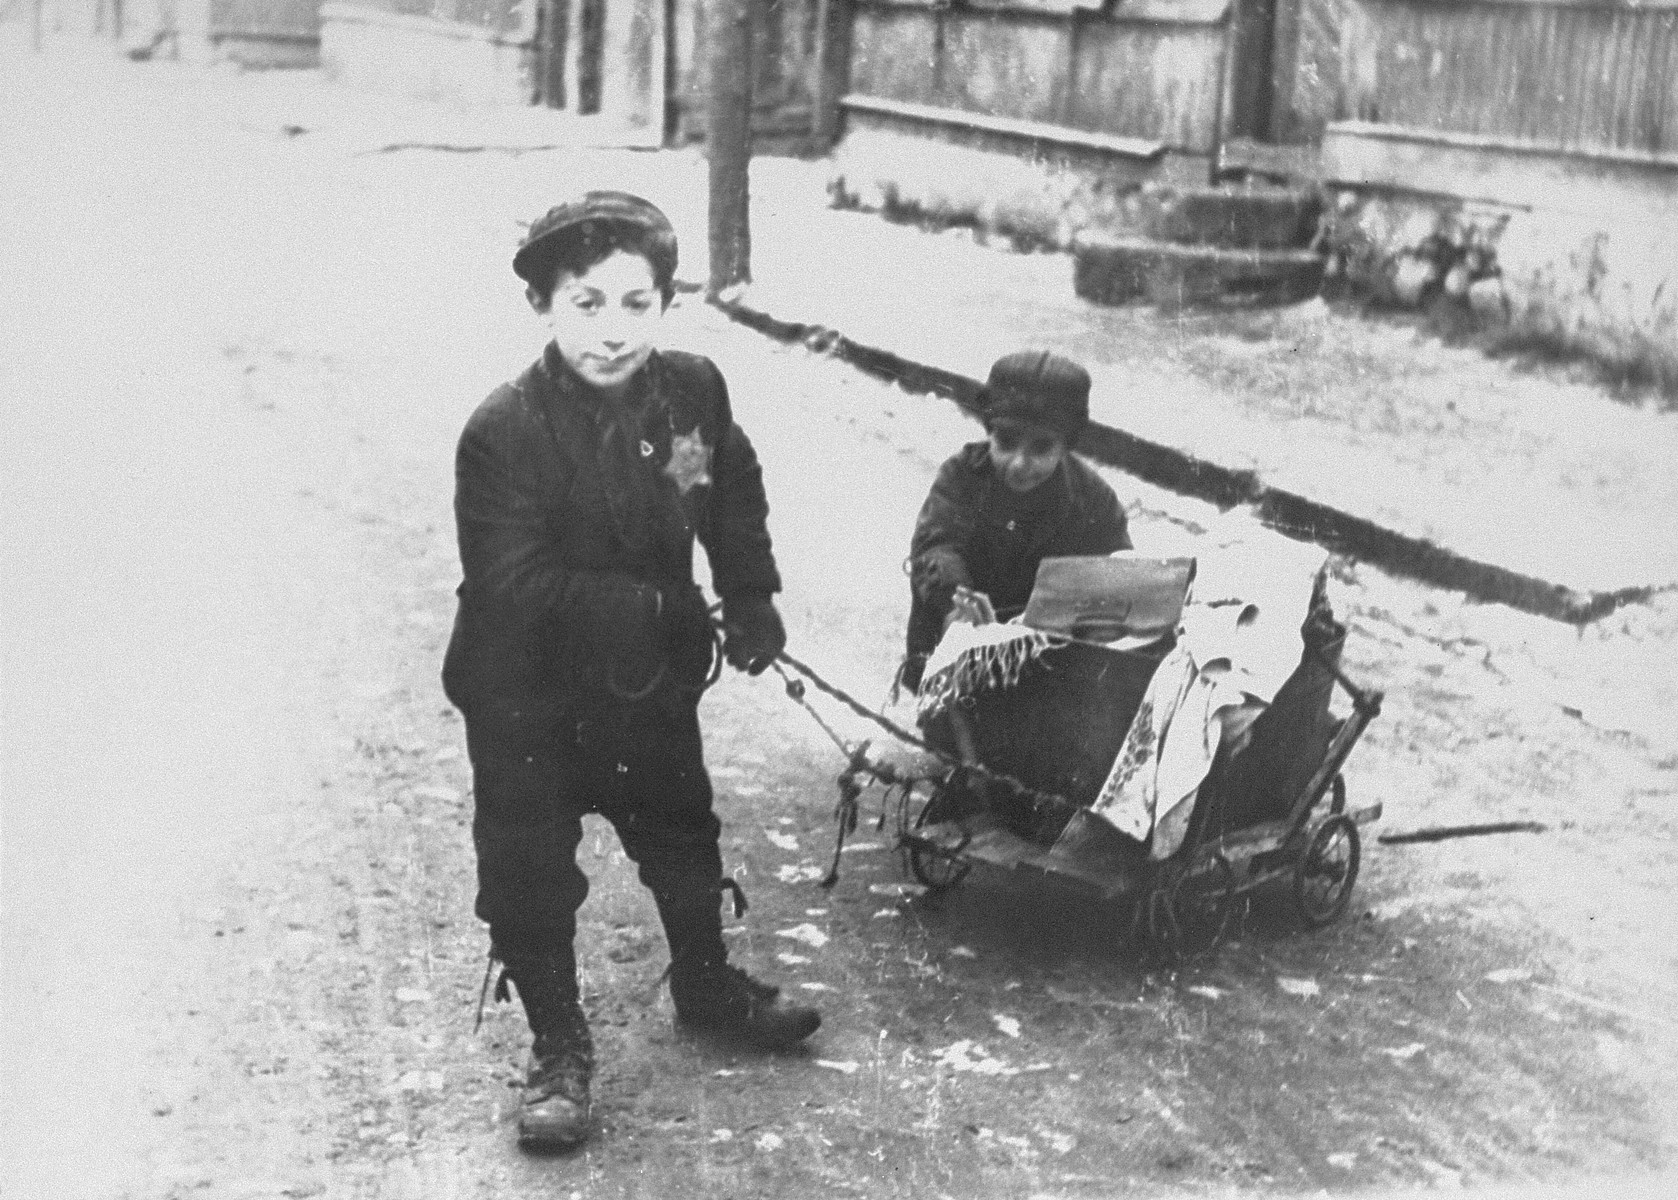 Two young boys pull and push a wagon in the Kovno ghetto. 

According to Solly Ganor: "Two orphans whose parents were murdered in the beginning of the war. There were many children like them in the ghetto. They lived with a sick grandmother in half a room sharing with other two families. He was the provider of the family, trading, stealing and begging. I would see him at the corner "market" place, trying to sell old shoes, torn garments and old books. He, his little brother and his grandmother were murdered at the "Children's Action". "